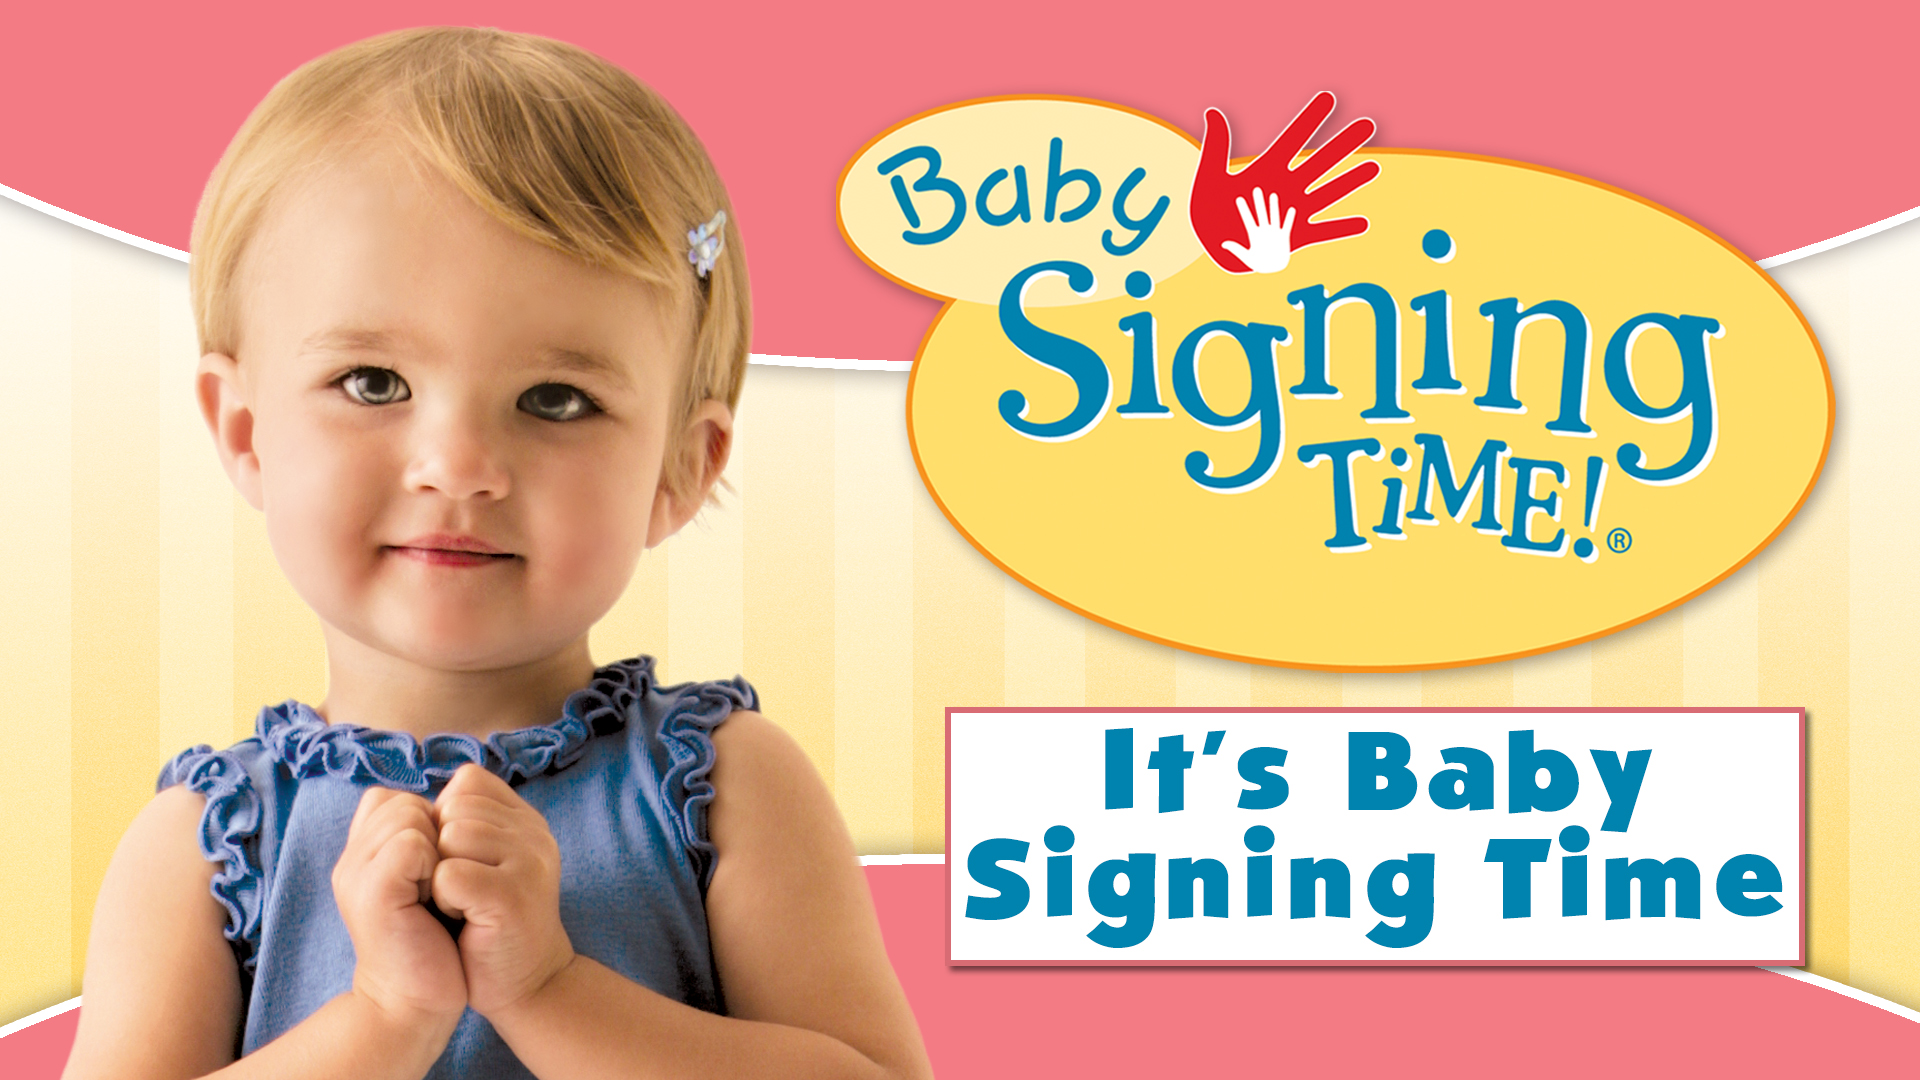 Baby Signing Time Vol. 1 & 2 - My Signing Time